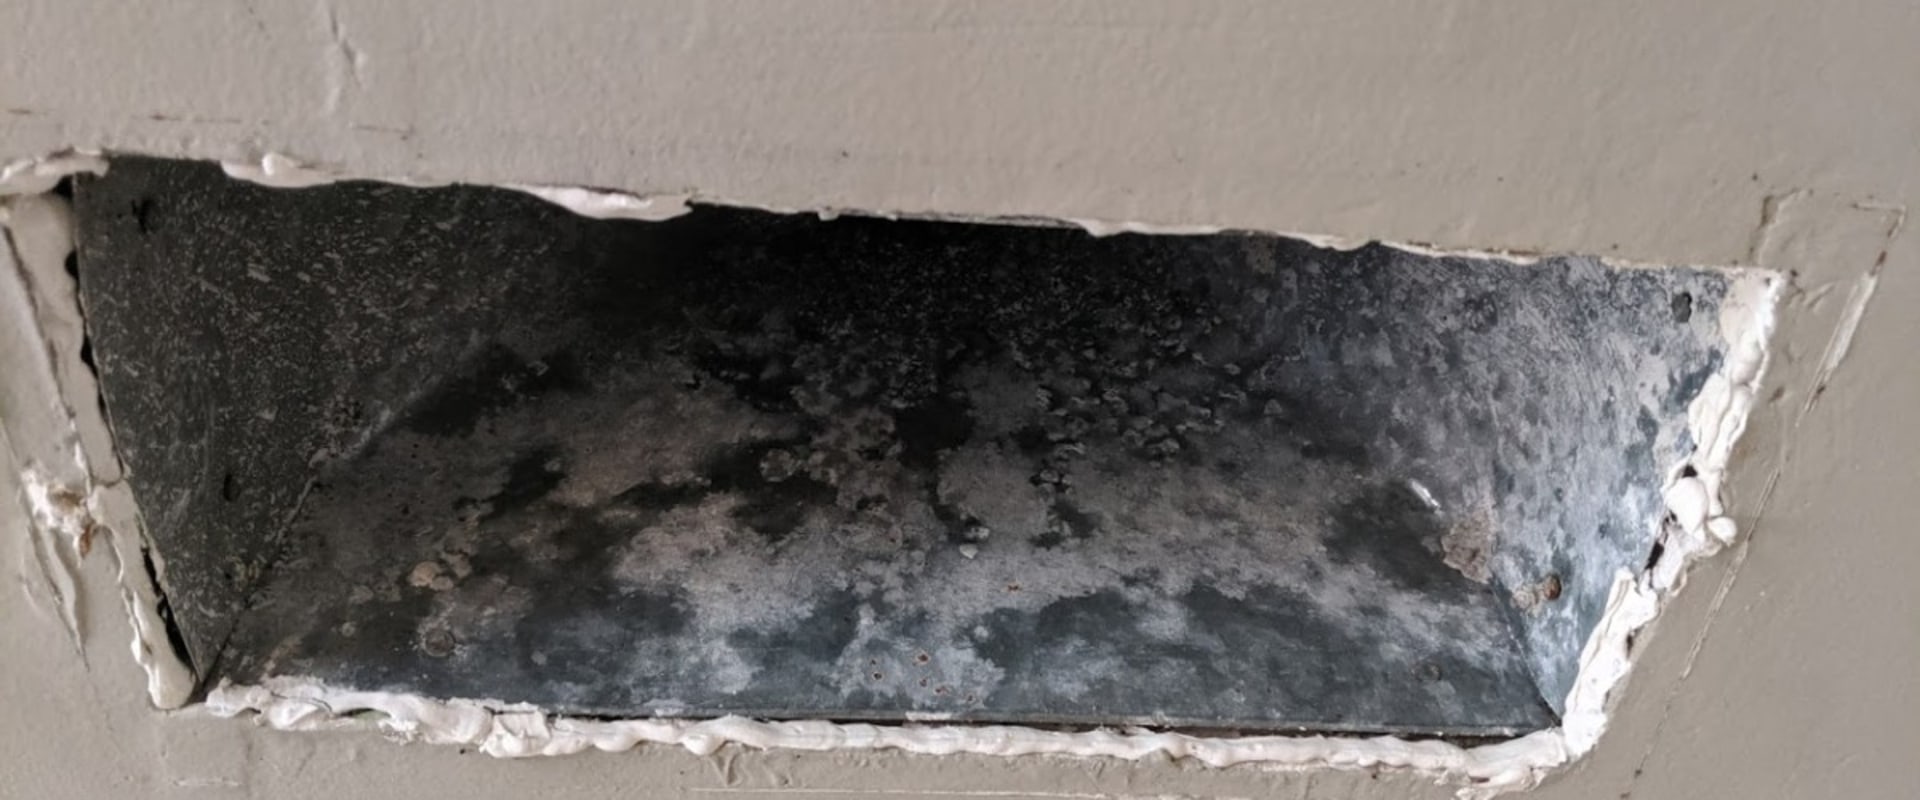 Creating an Energy Efficient Home: Sealing Around Registers in a Duct System